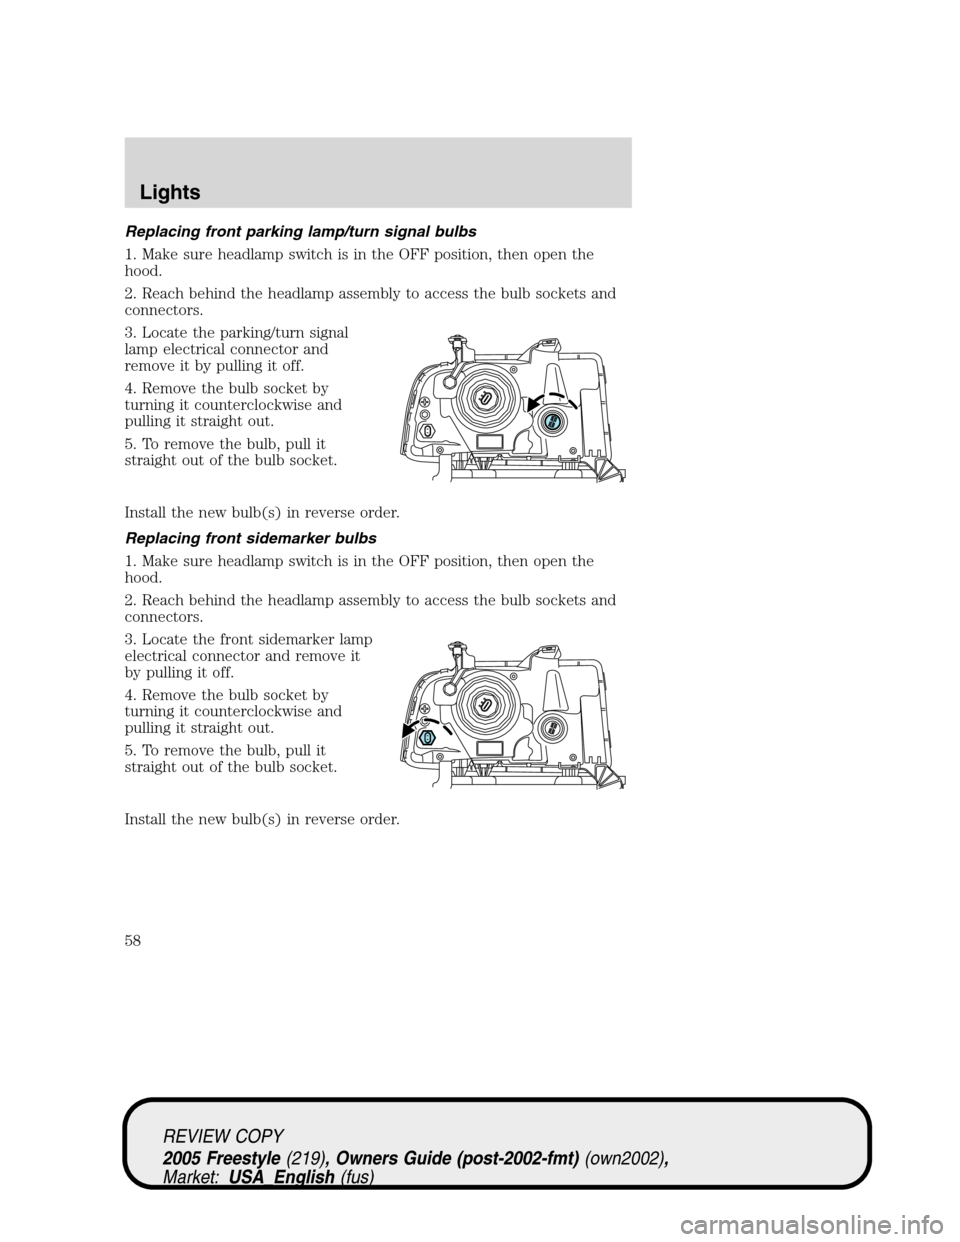 FORD FREESTYLE 2005 1.G Owners Manual Replacing front parking lamp/turn signal bulbs
1. Make sure headlamp switch is in the OFF position, then open the
hood.
2. Reach behind the headlamp assembly to access the bulb sockets and
connectors.